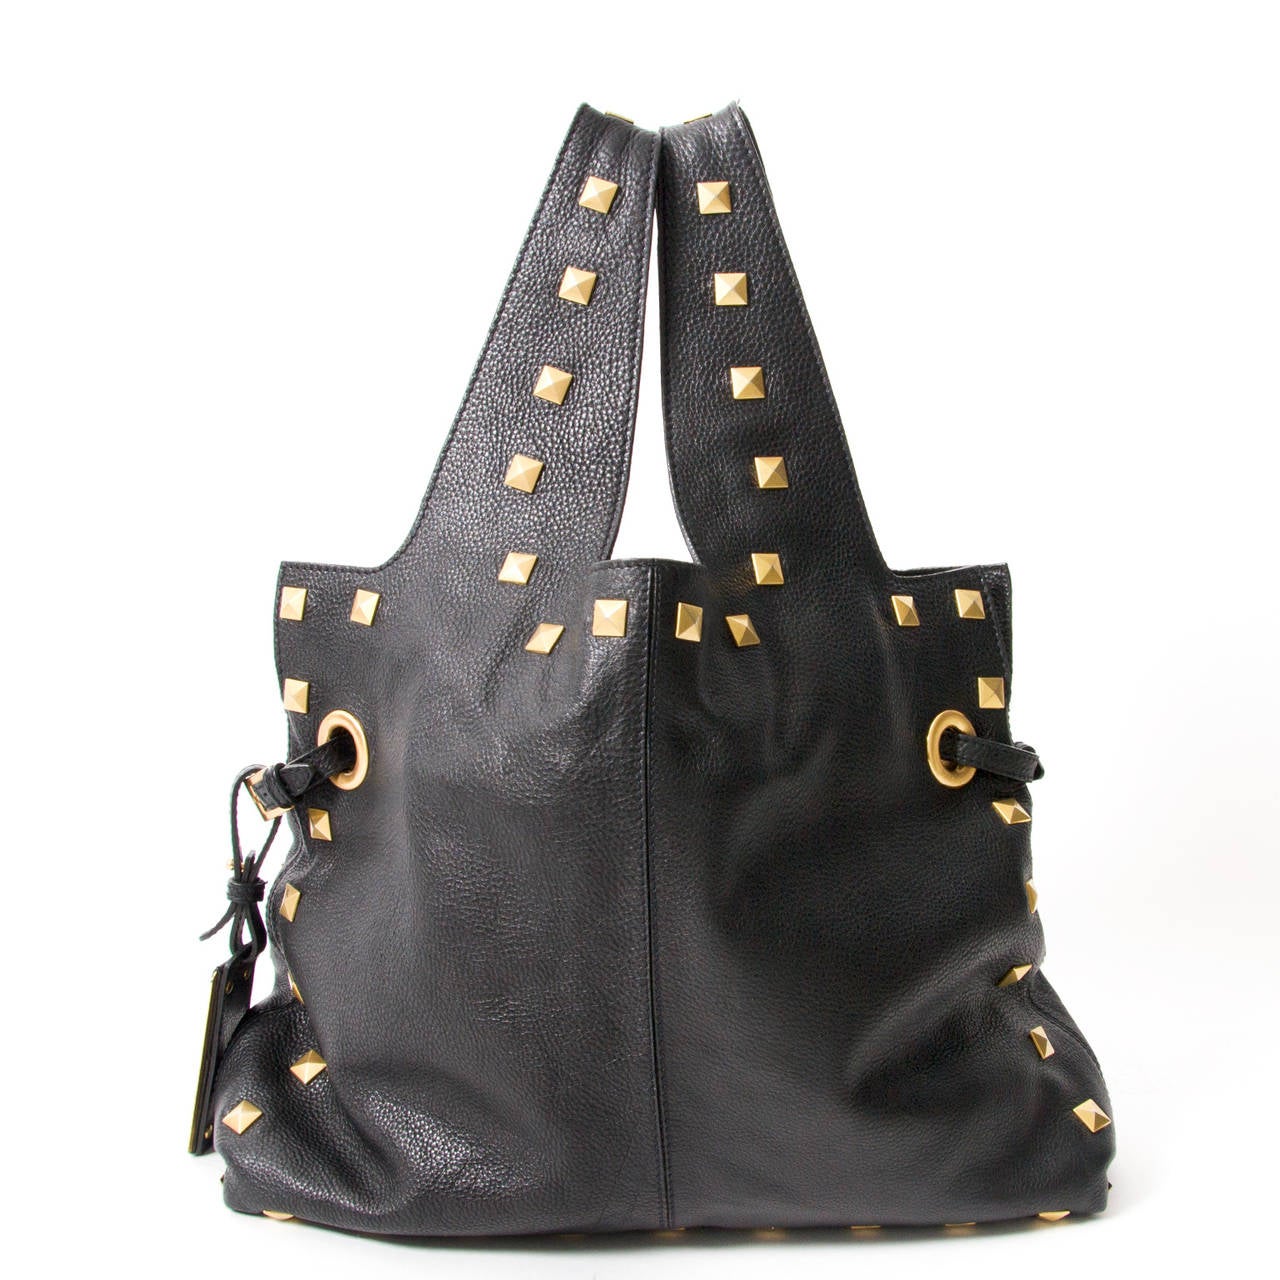 Black shopper with two large top handles in supple leather.

The bag features large gold-tone studs on the handles, sides and on the front in a heart shape.

On each side are two holes with adjustable strap. On one side there is a gold plate